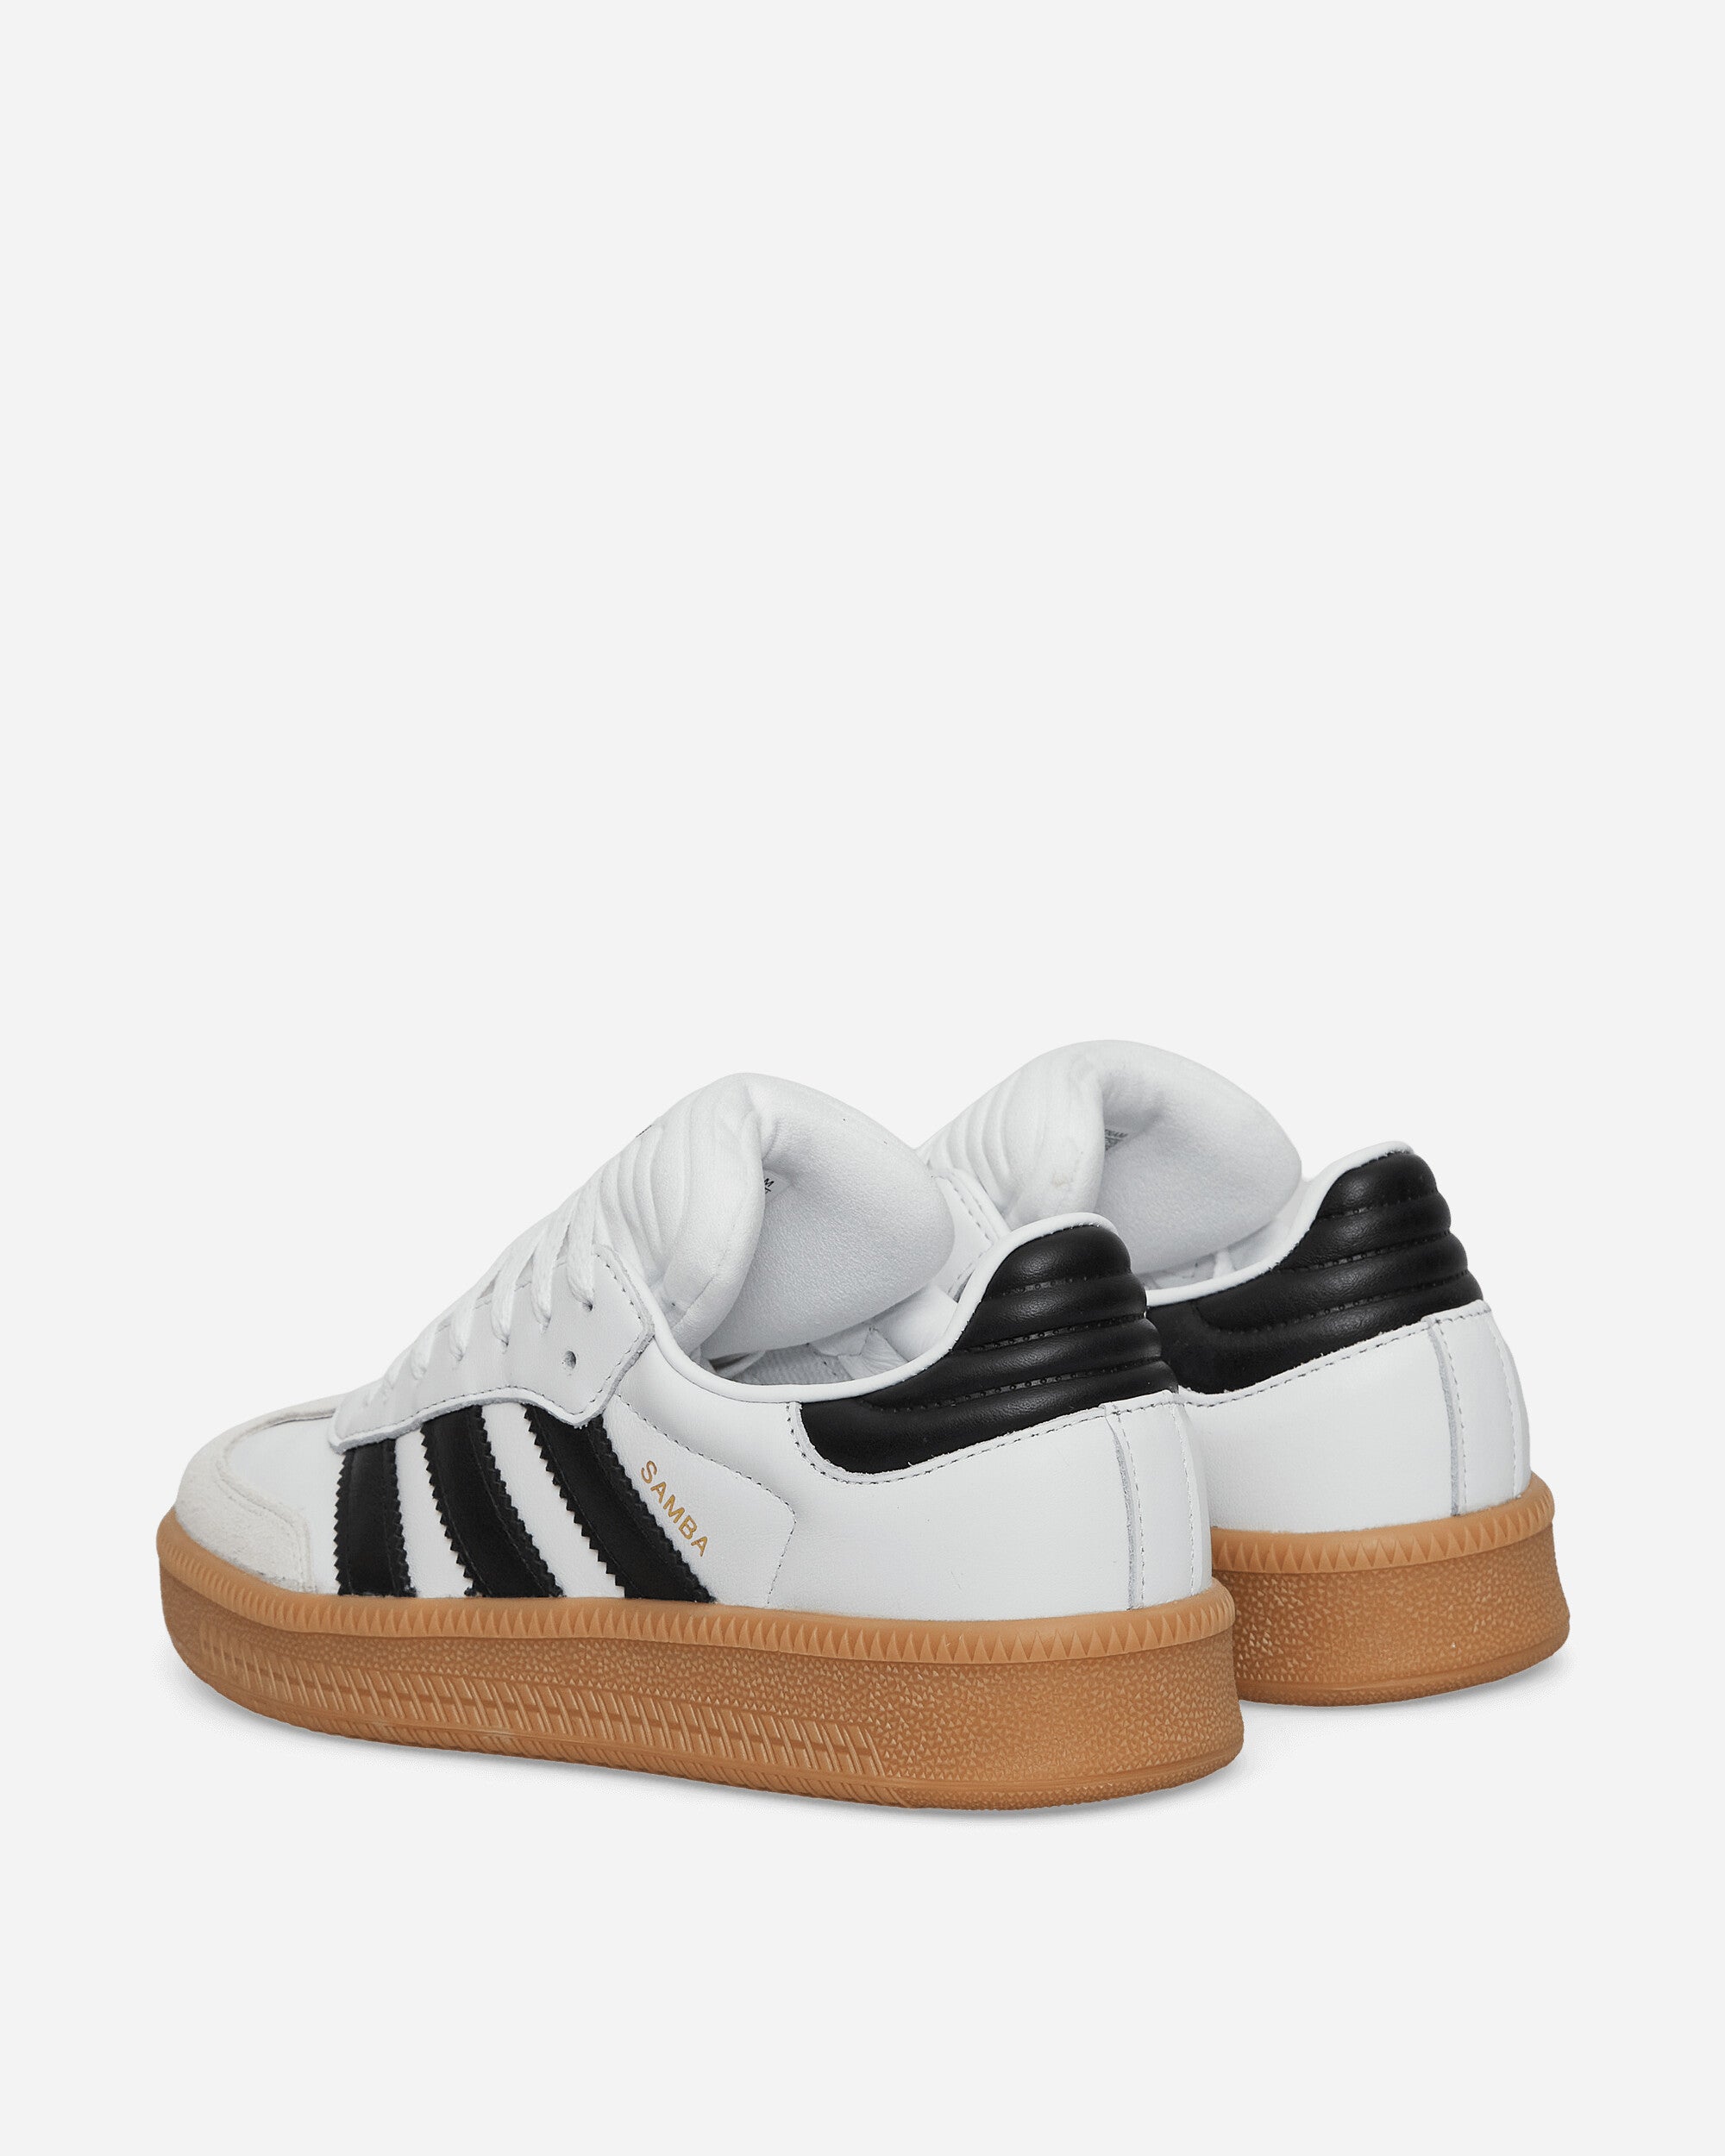 adidas Samba Xlg Ftwr White/Core Black Sneakers Low IE1377 001